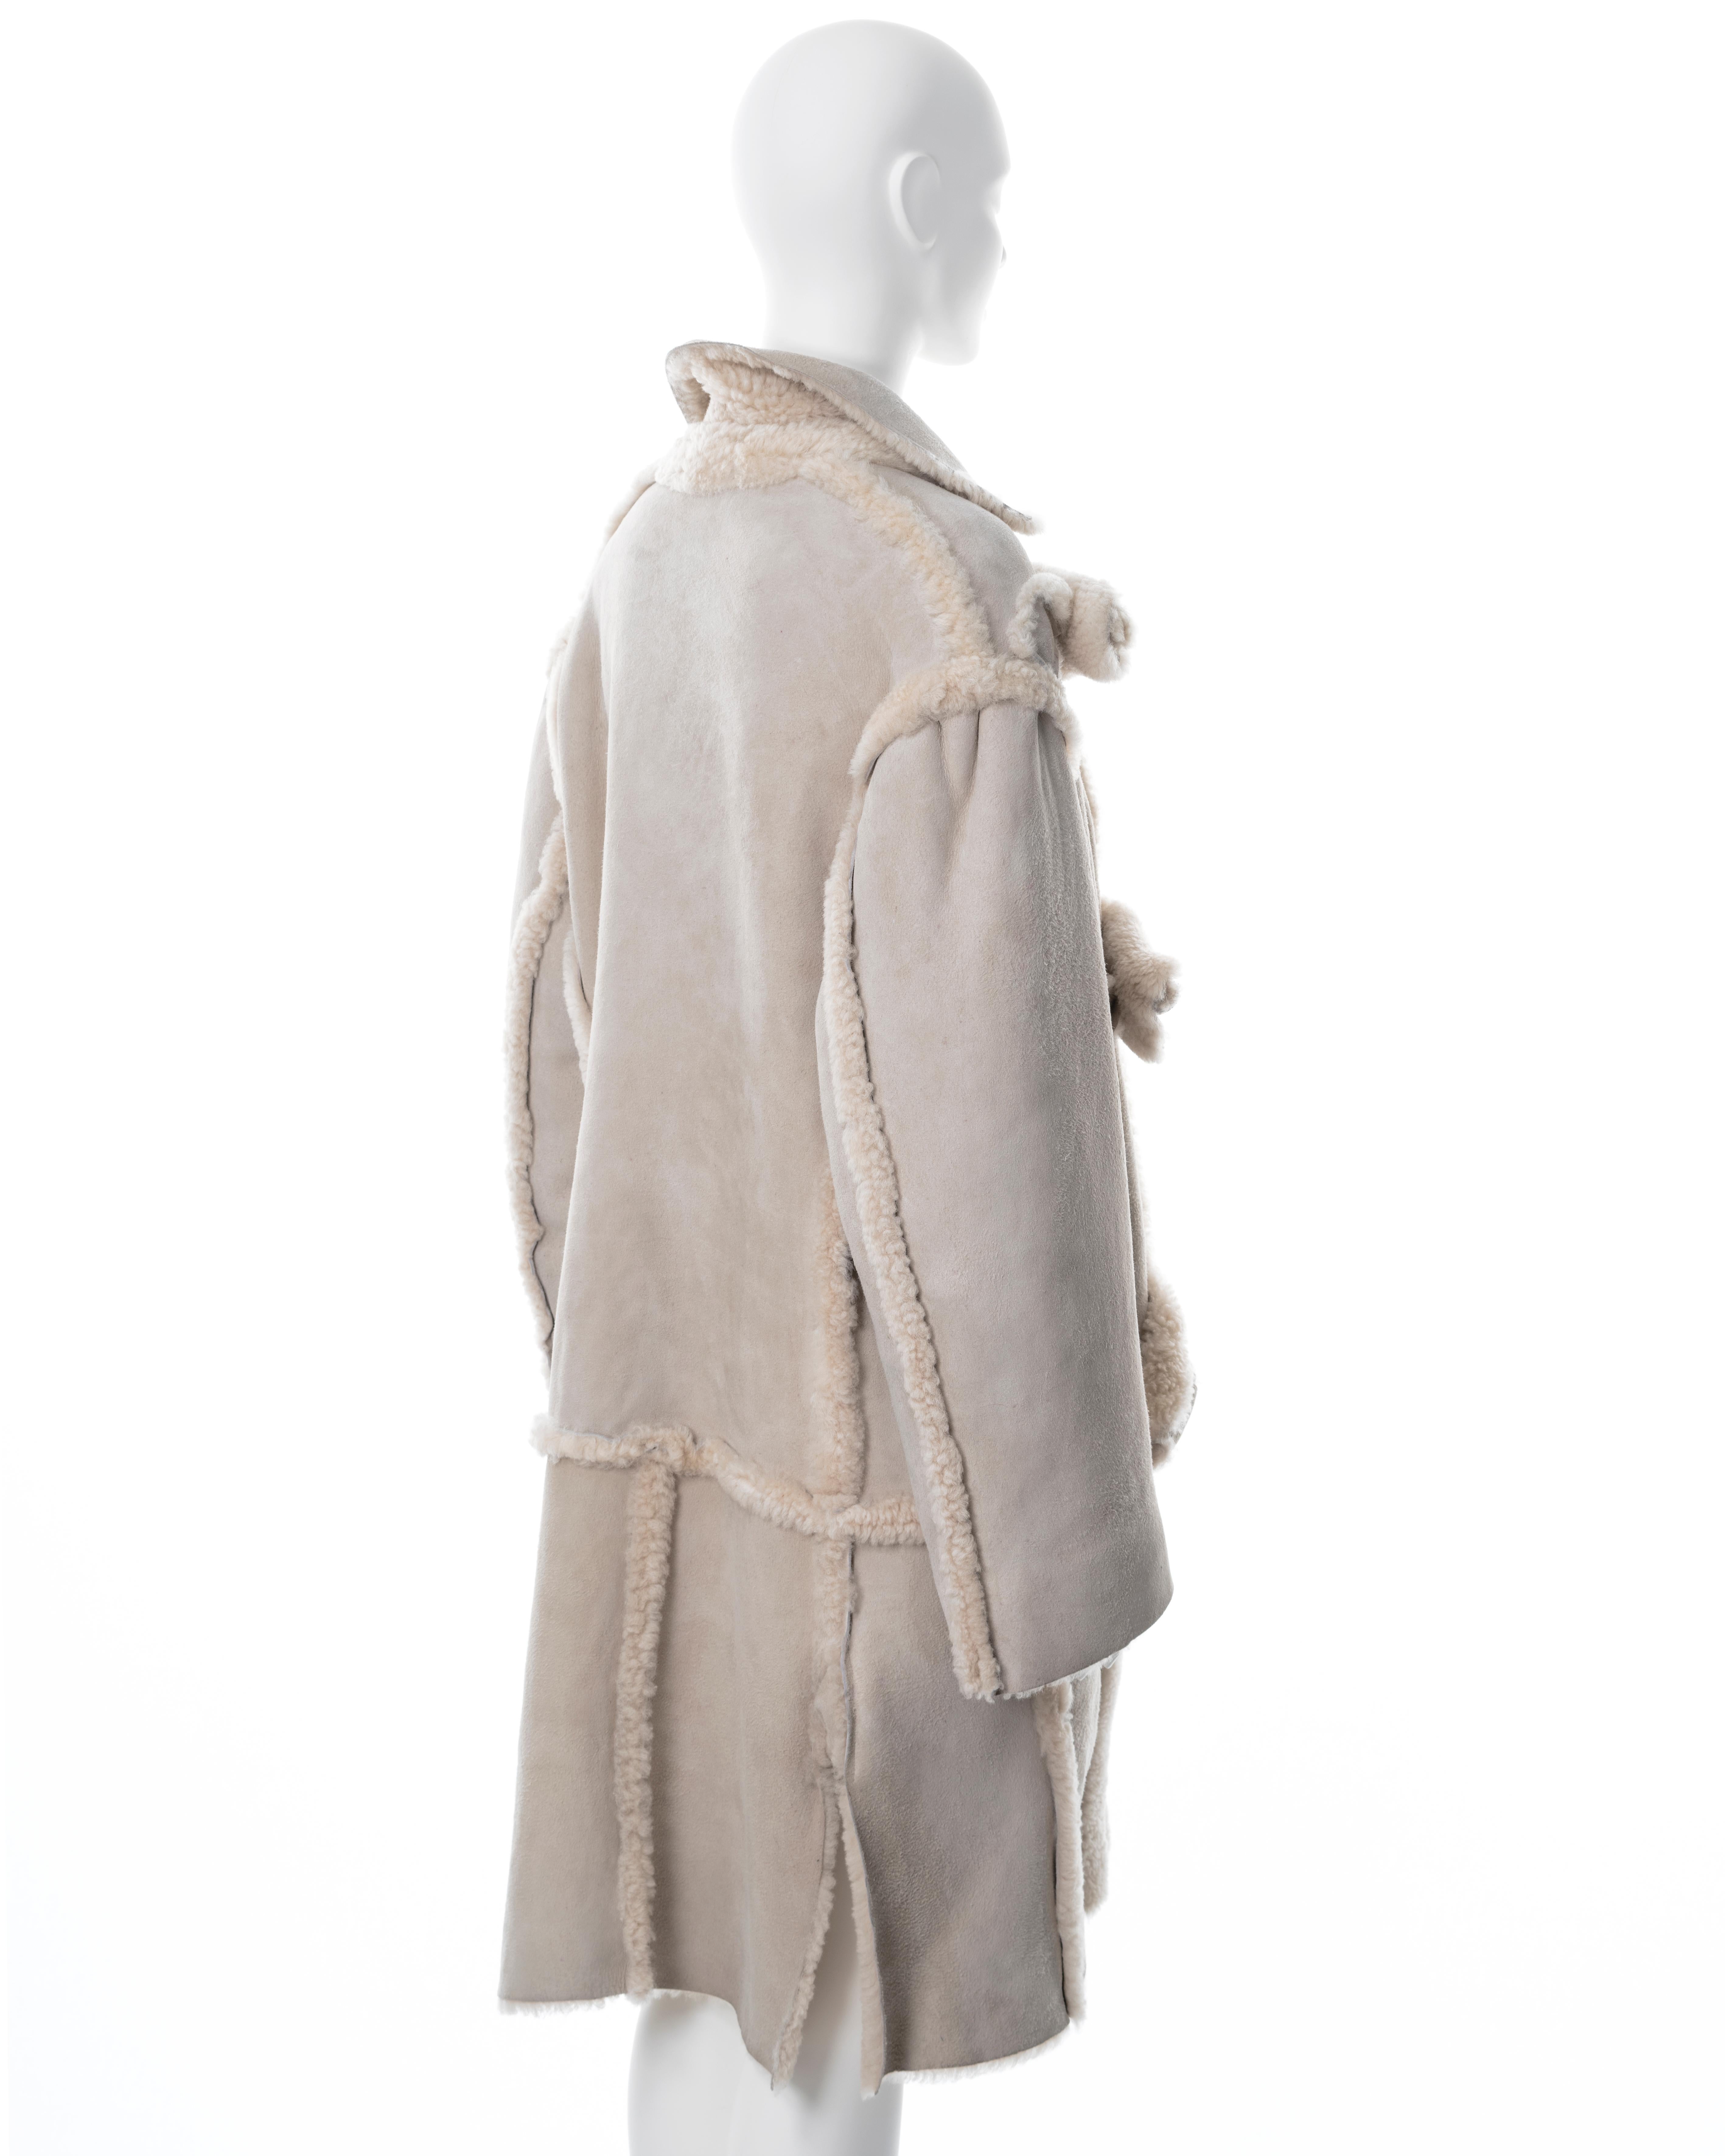 Worlds End by Vivienne Westwood and Malcolm McLaren 'Buffalo' coat, fw 1982 For Sale 6